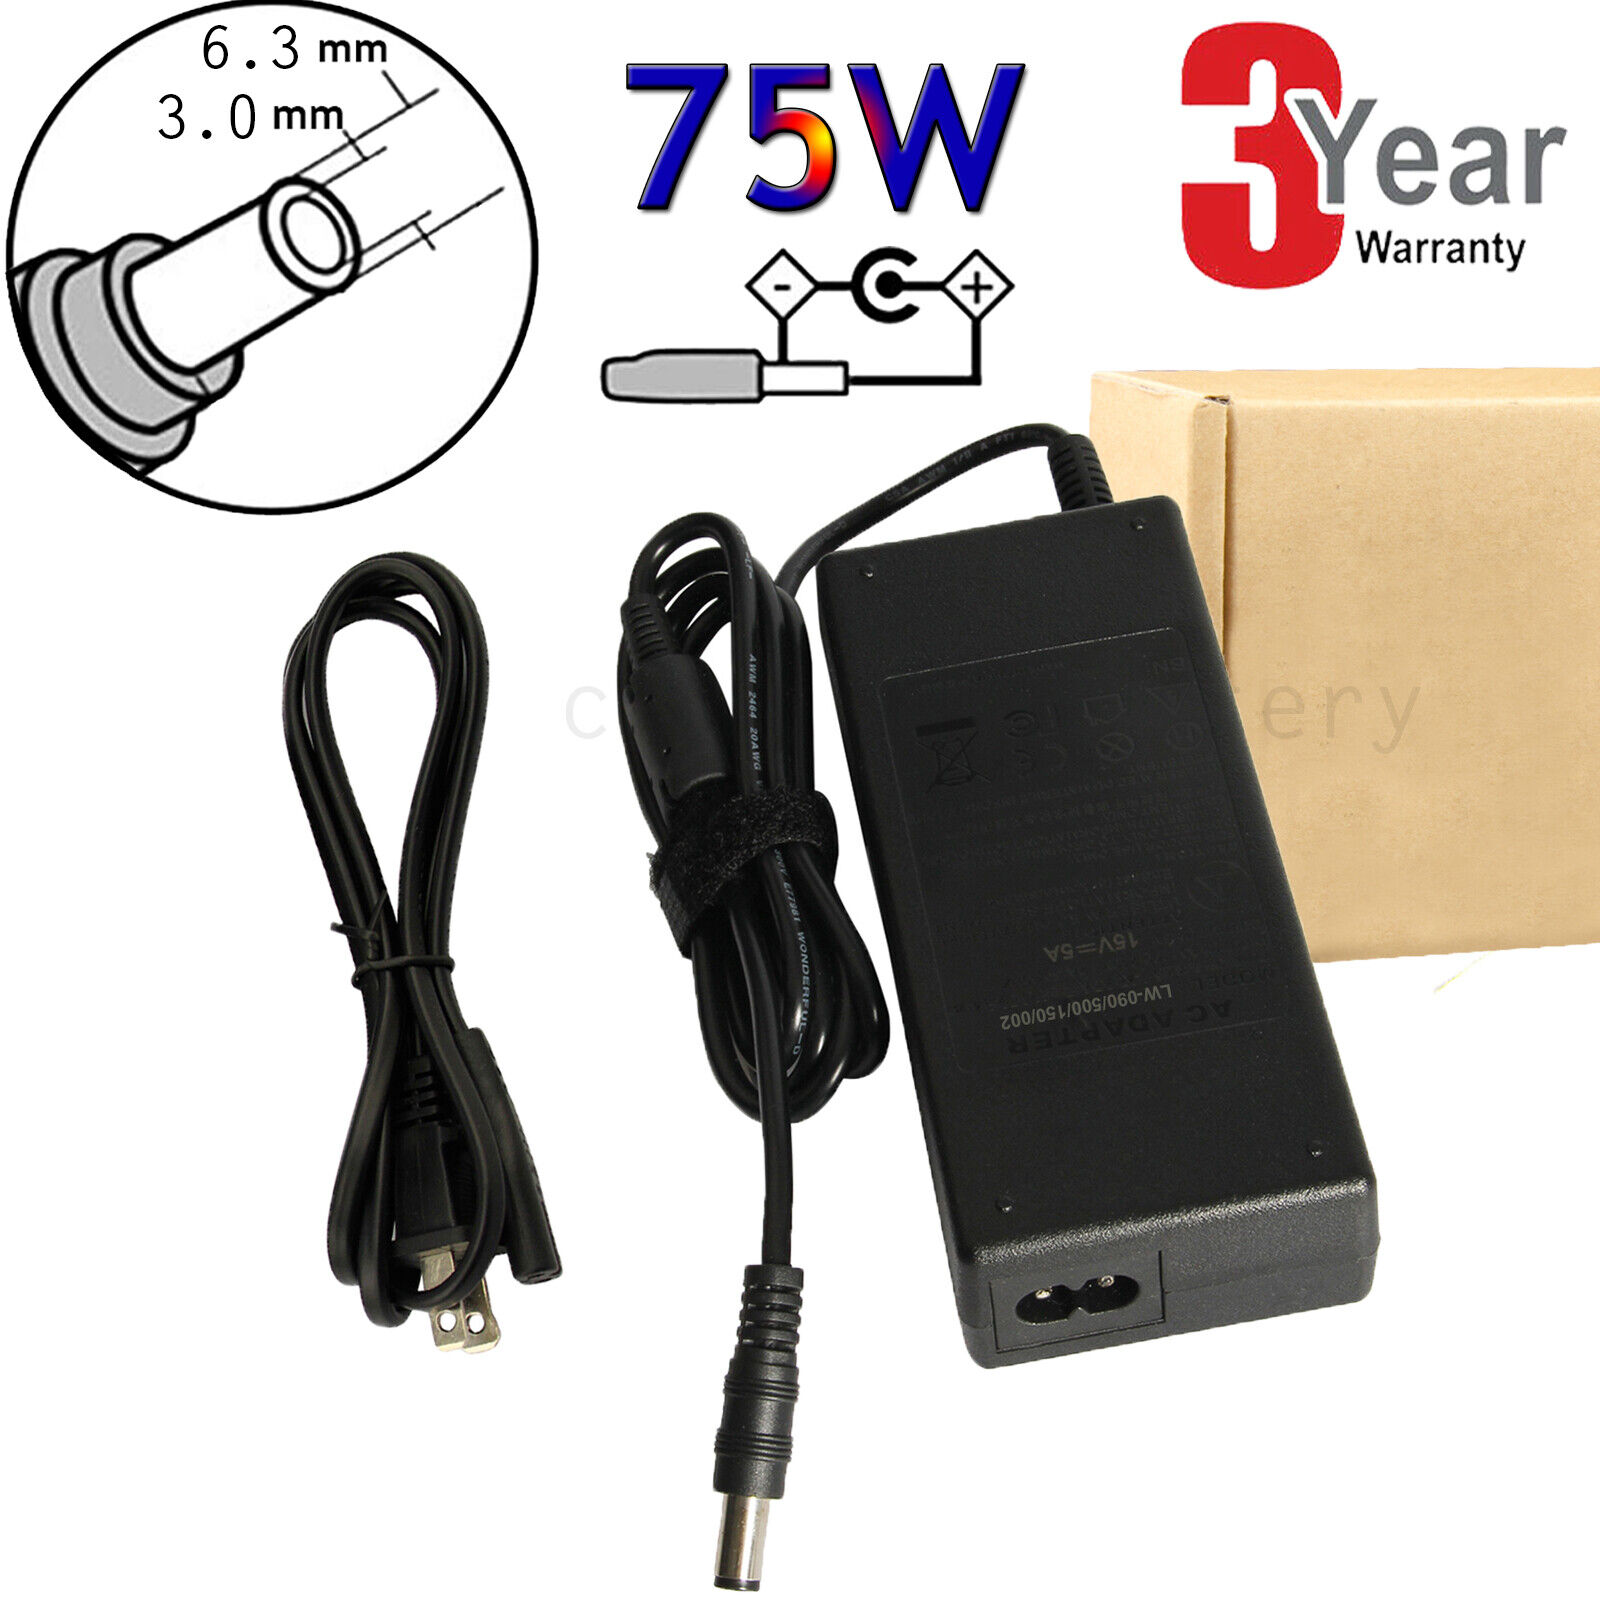 New 15V 75W AC Adapter Charger for Toshiba Tecra A2 A3 A4 A5 A8 M2 PA3283U-5ACA